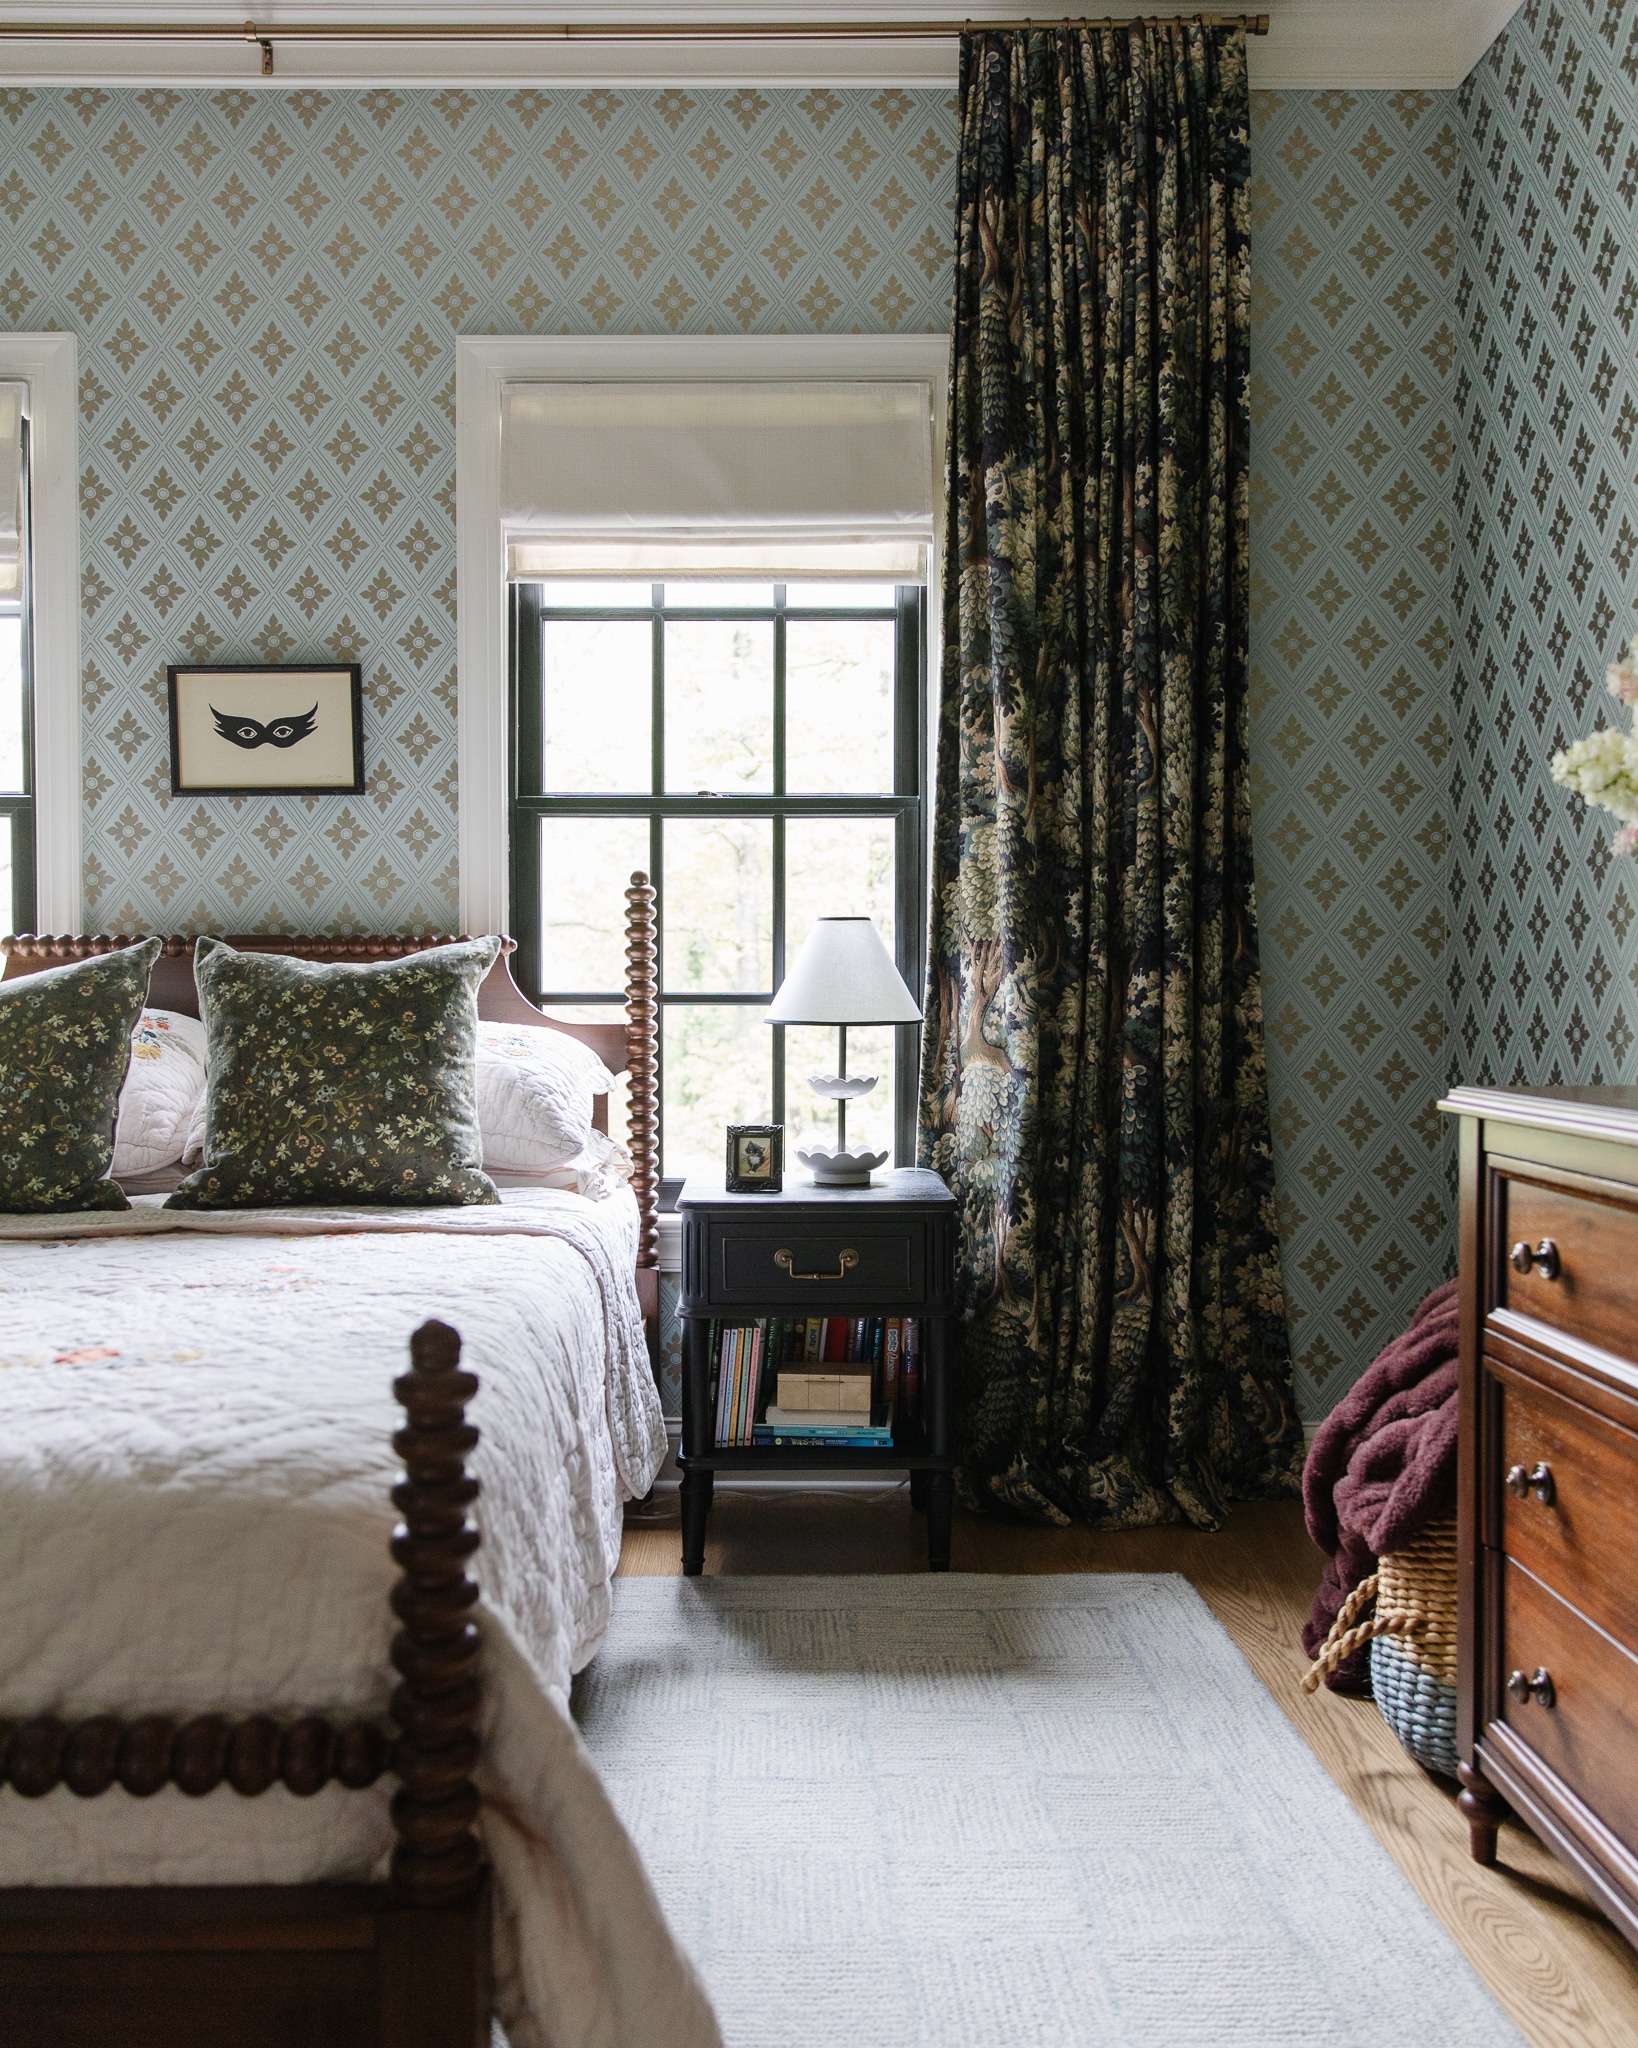 Chris Loves Julia | Faye's bedroom with teal blue wallpaper, woodland drapes and turned wood bed